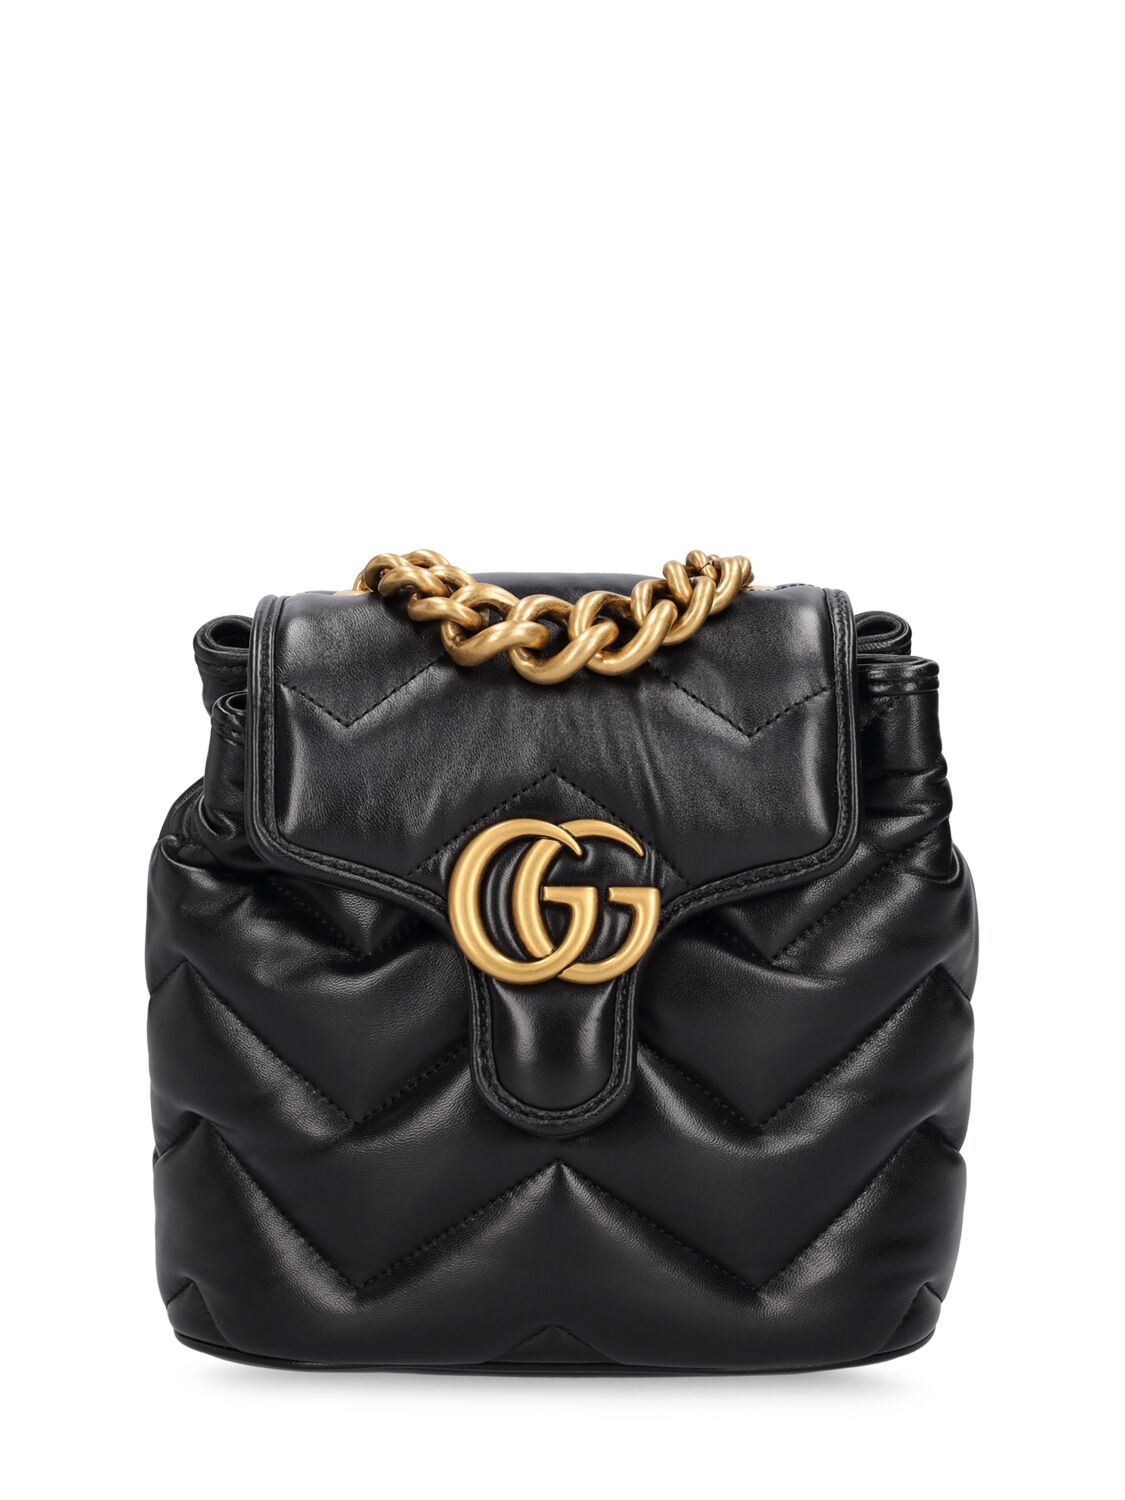 Image of Gg Marmont Leather Backpack